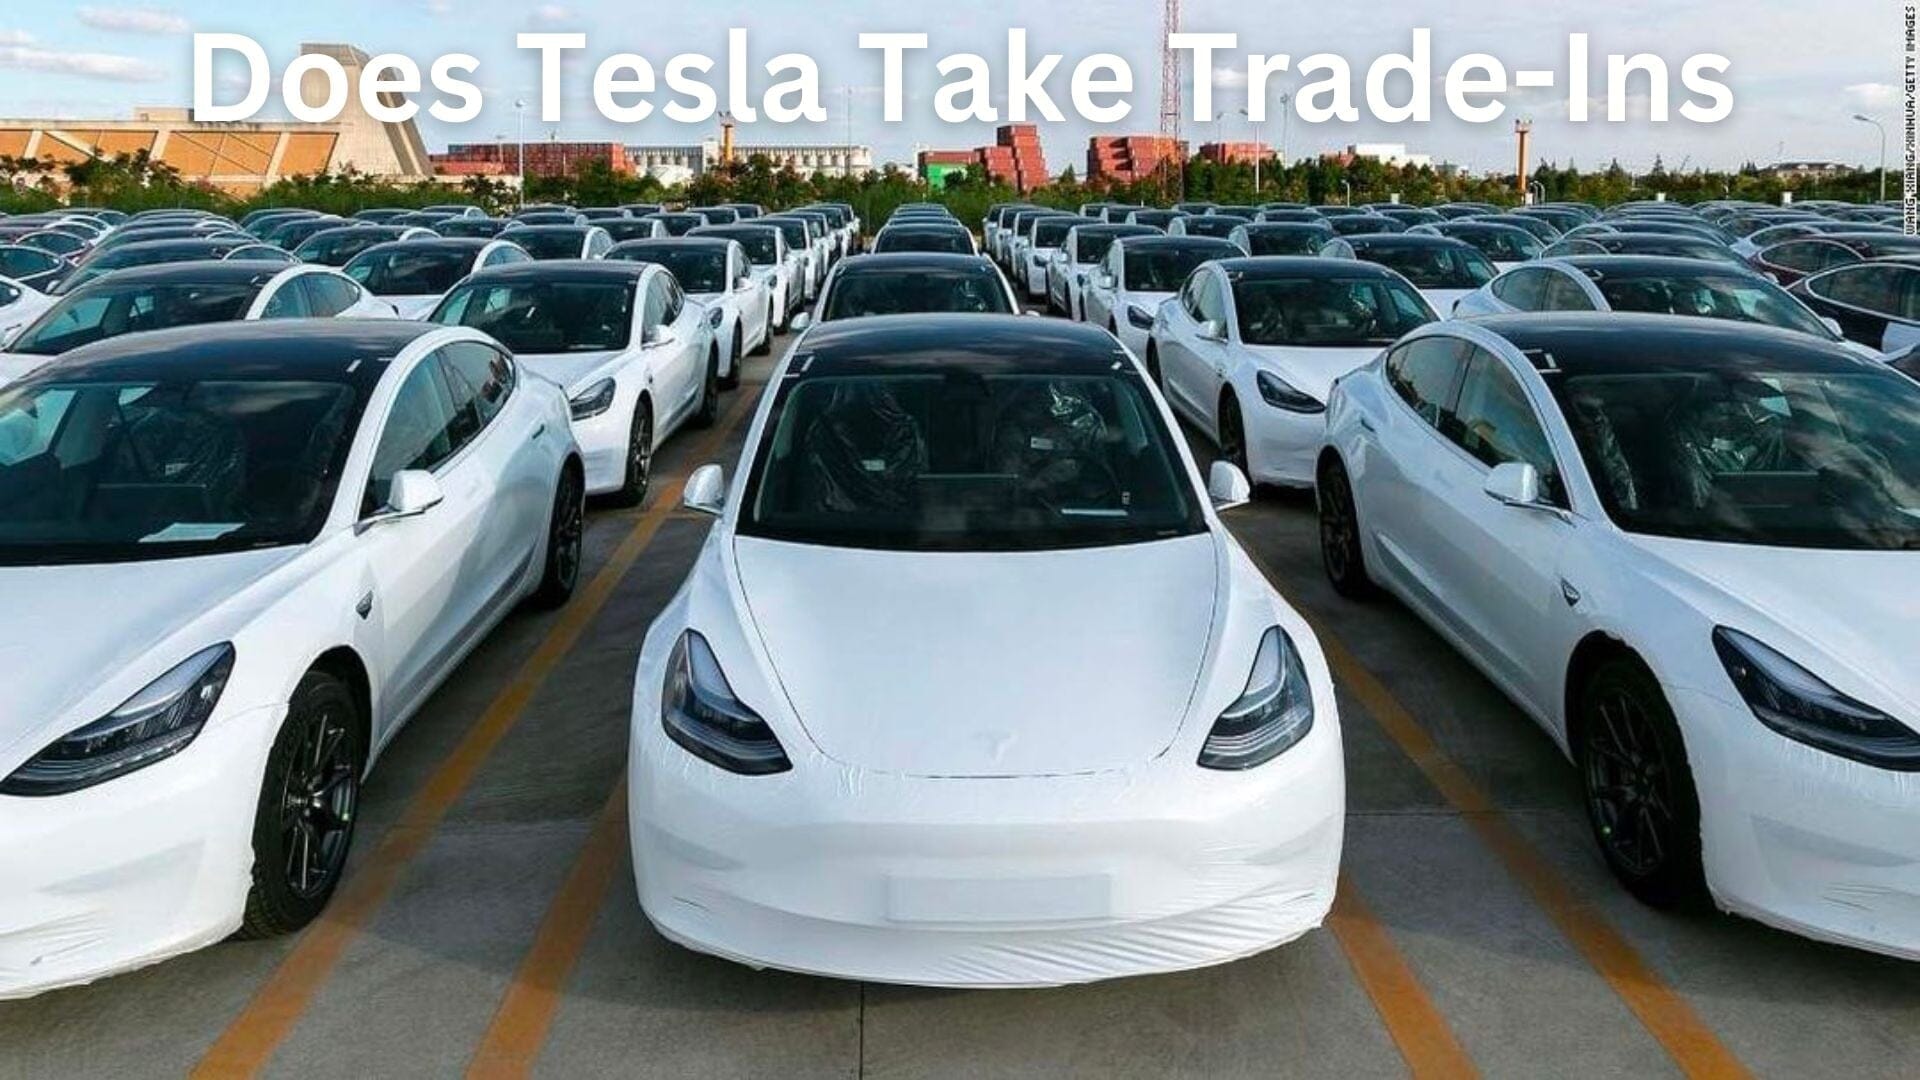 Does Tesla Take Trade-Ins? Your Guide to Tesla's Trade-In Process